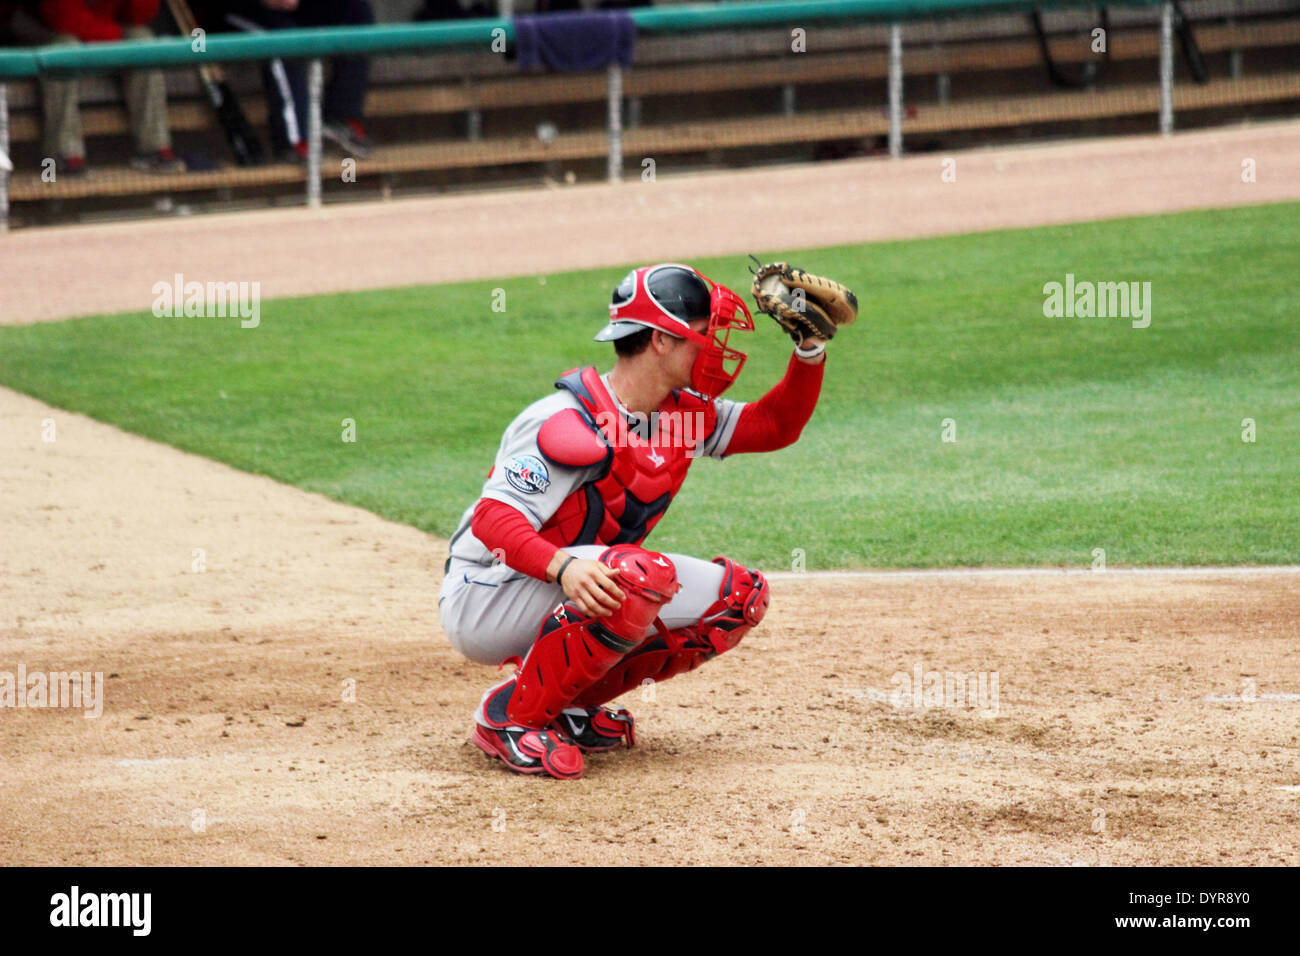 A baseball catcher at the plate Stock Photo